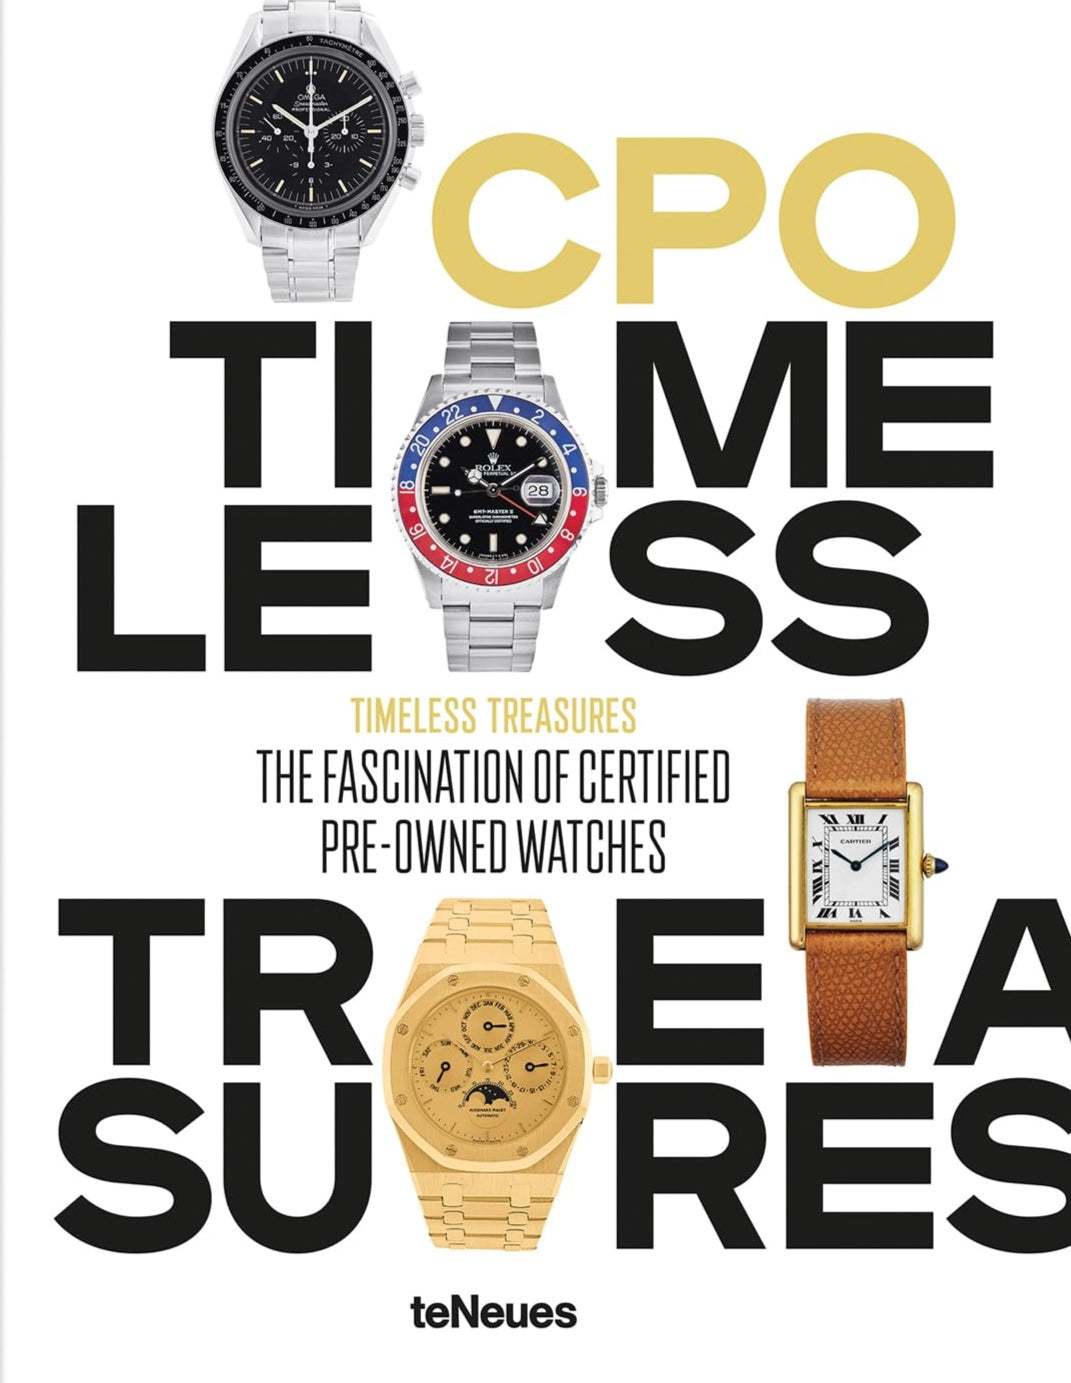 Timeless Treasures - The Fascination of Certified Pre-Owned Watches